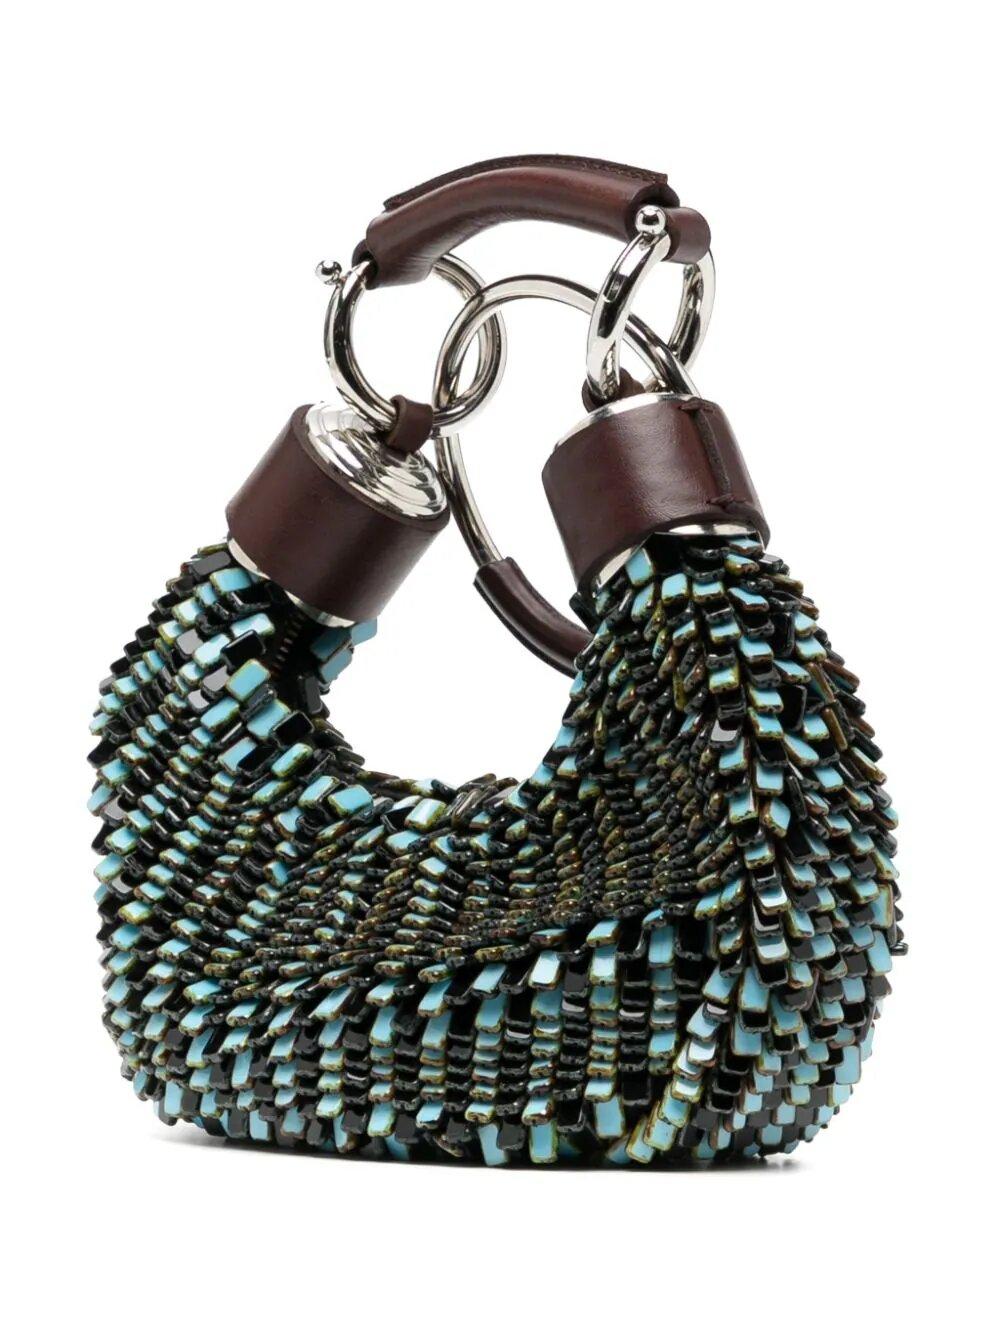 The Chloe Half Moon Bracelet Bag combines fashion and function with its unique glass beaded design. The composition, consisting of 20% Plexiglass and 80% leather, ensures durability and style. Elevate any outfit with this elegant and practical